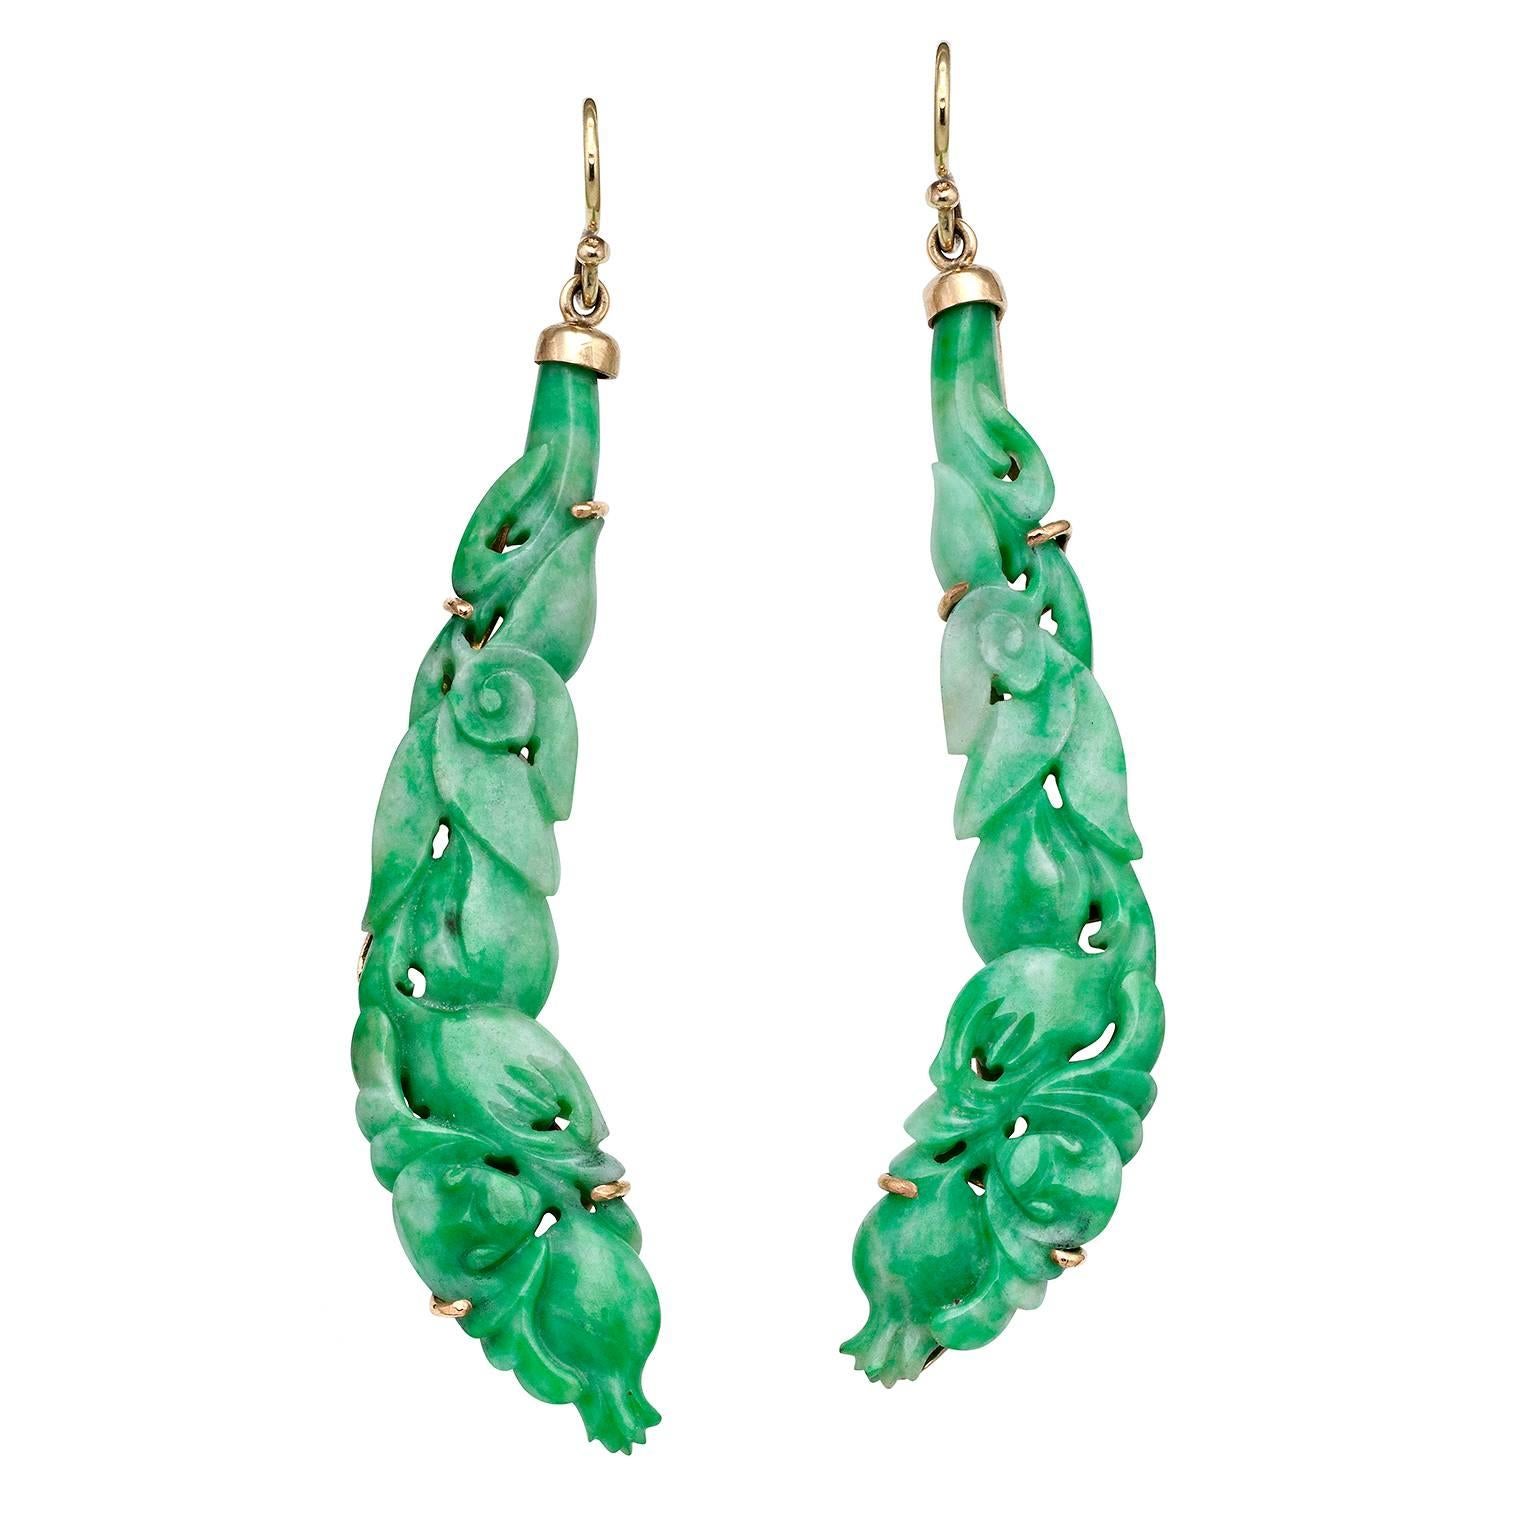 Pair of Jadeite Earrings, Hand Carved and Set in 14 Carat Gold In New Condition For Sale In Malvern, Victoria